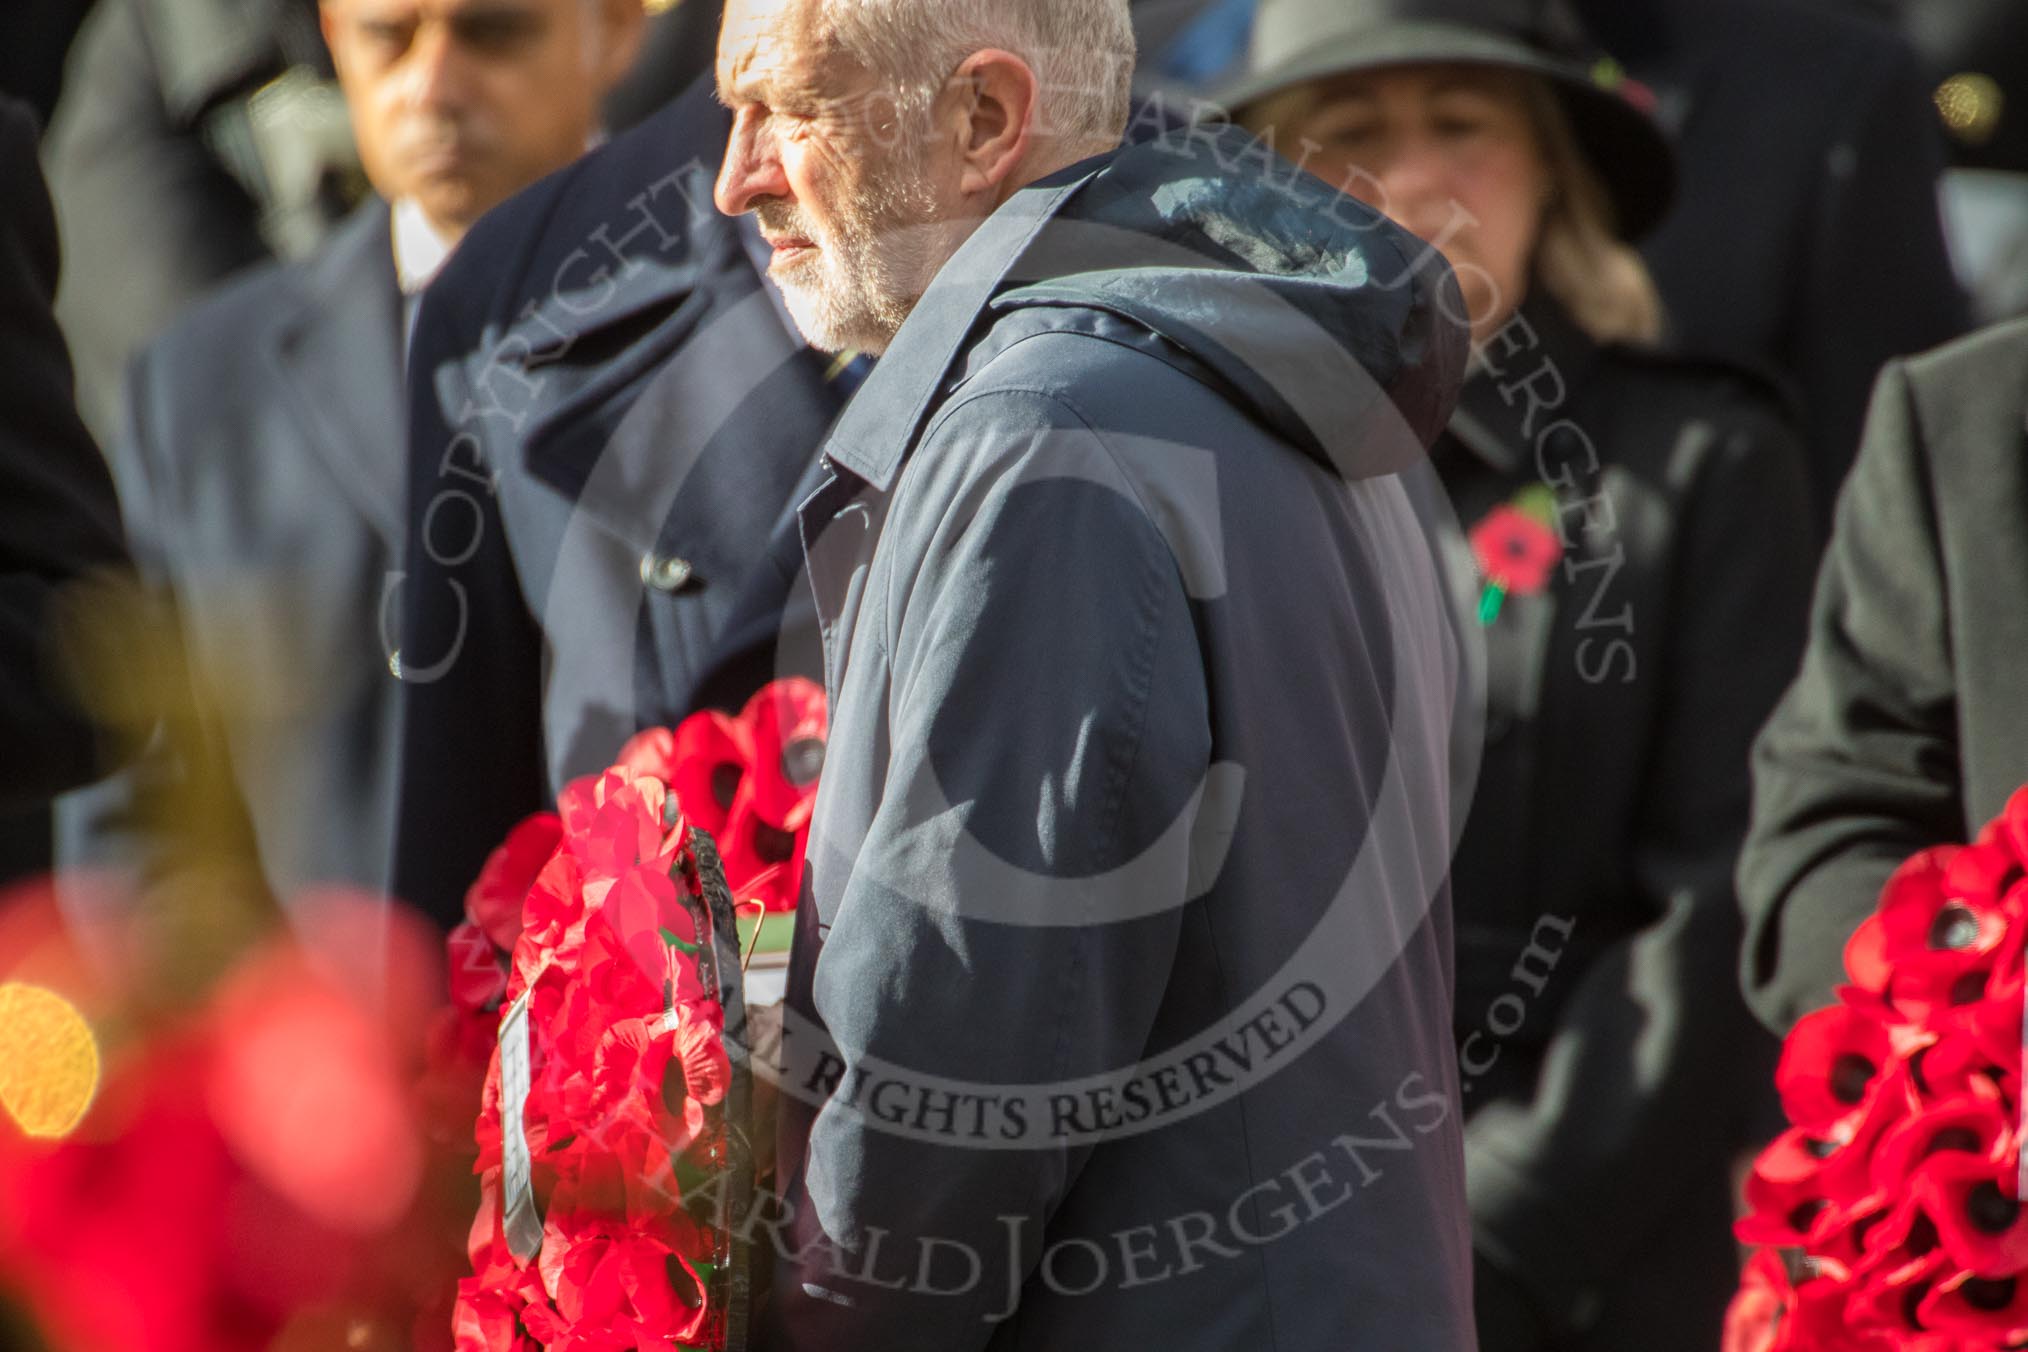 The Rt Hon Jeremy Corbyn MP, (Leader of the Labour Party and Leader of the Opposition)  during the Remembrance Sunday Cenotaph Ceremony 2018 at Horse Guards Parade, Westminster, London, 11 November 2018, 11:08.